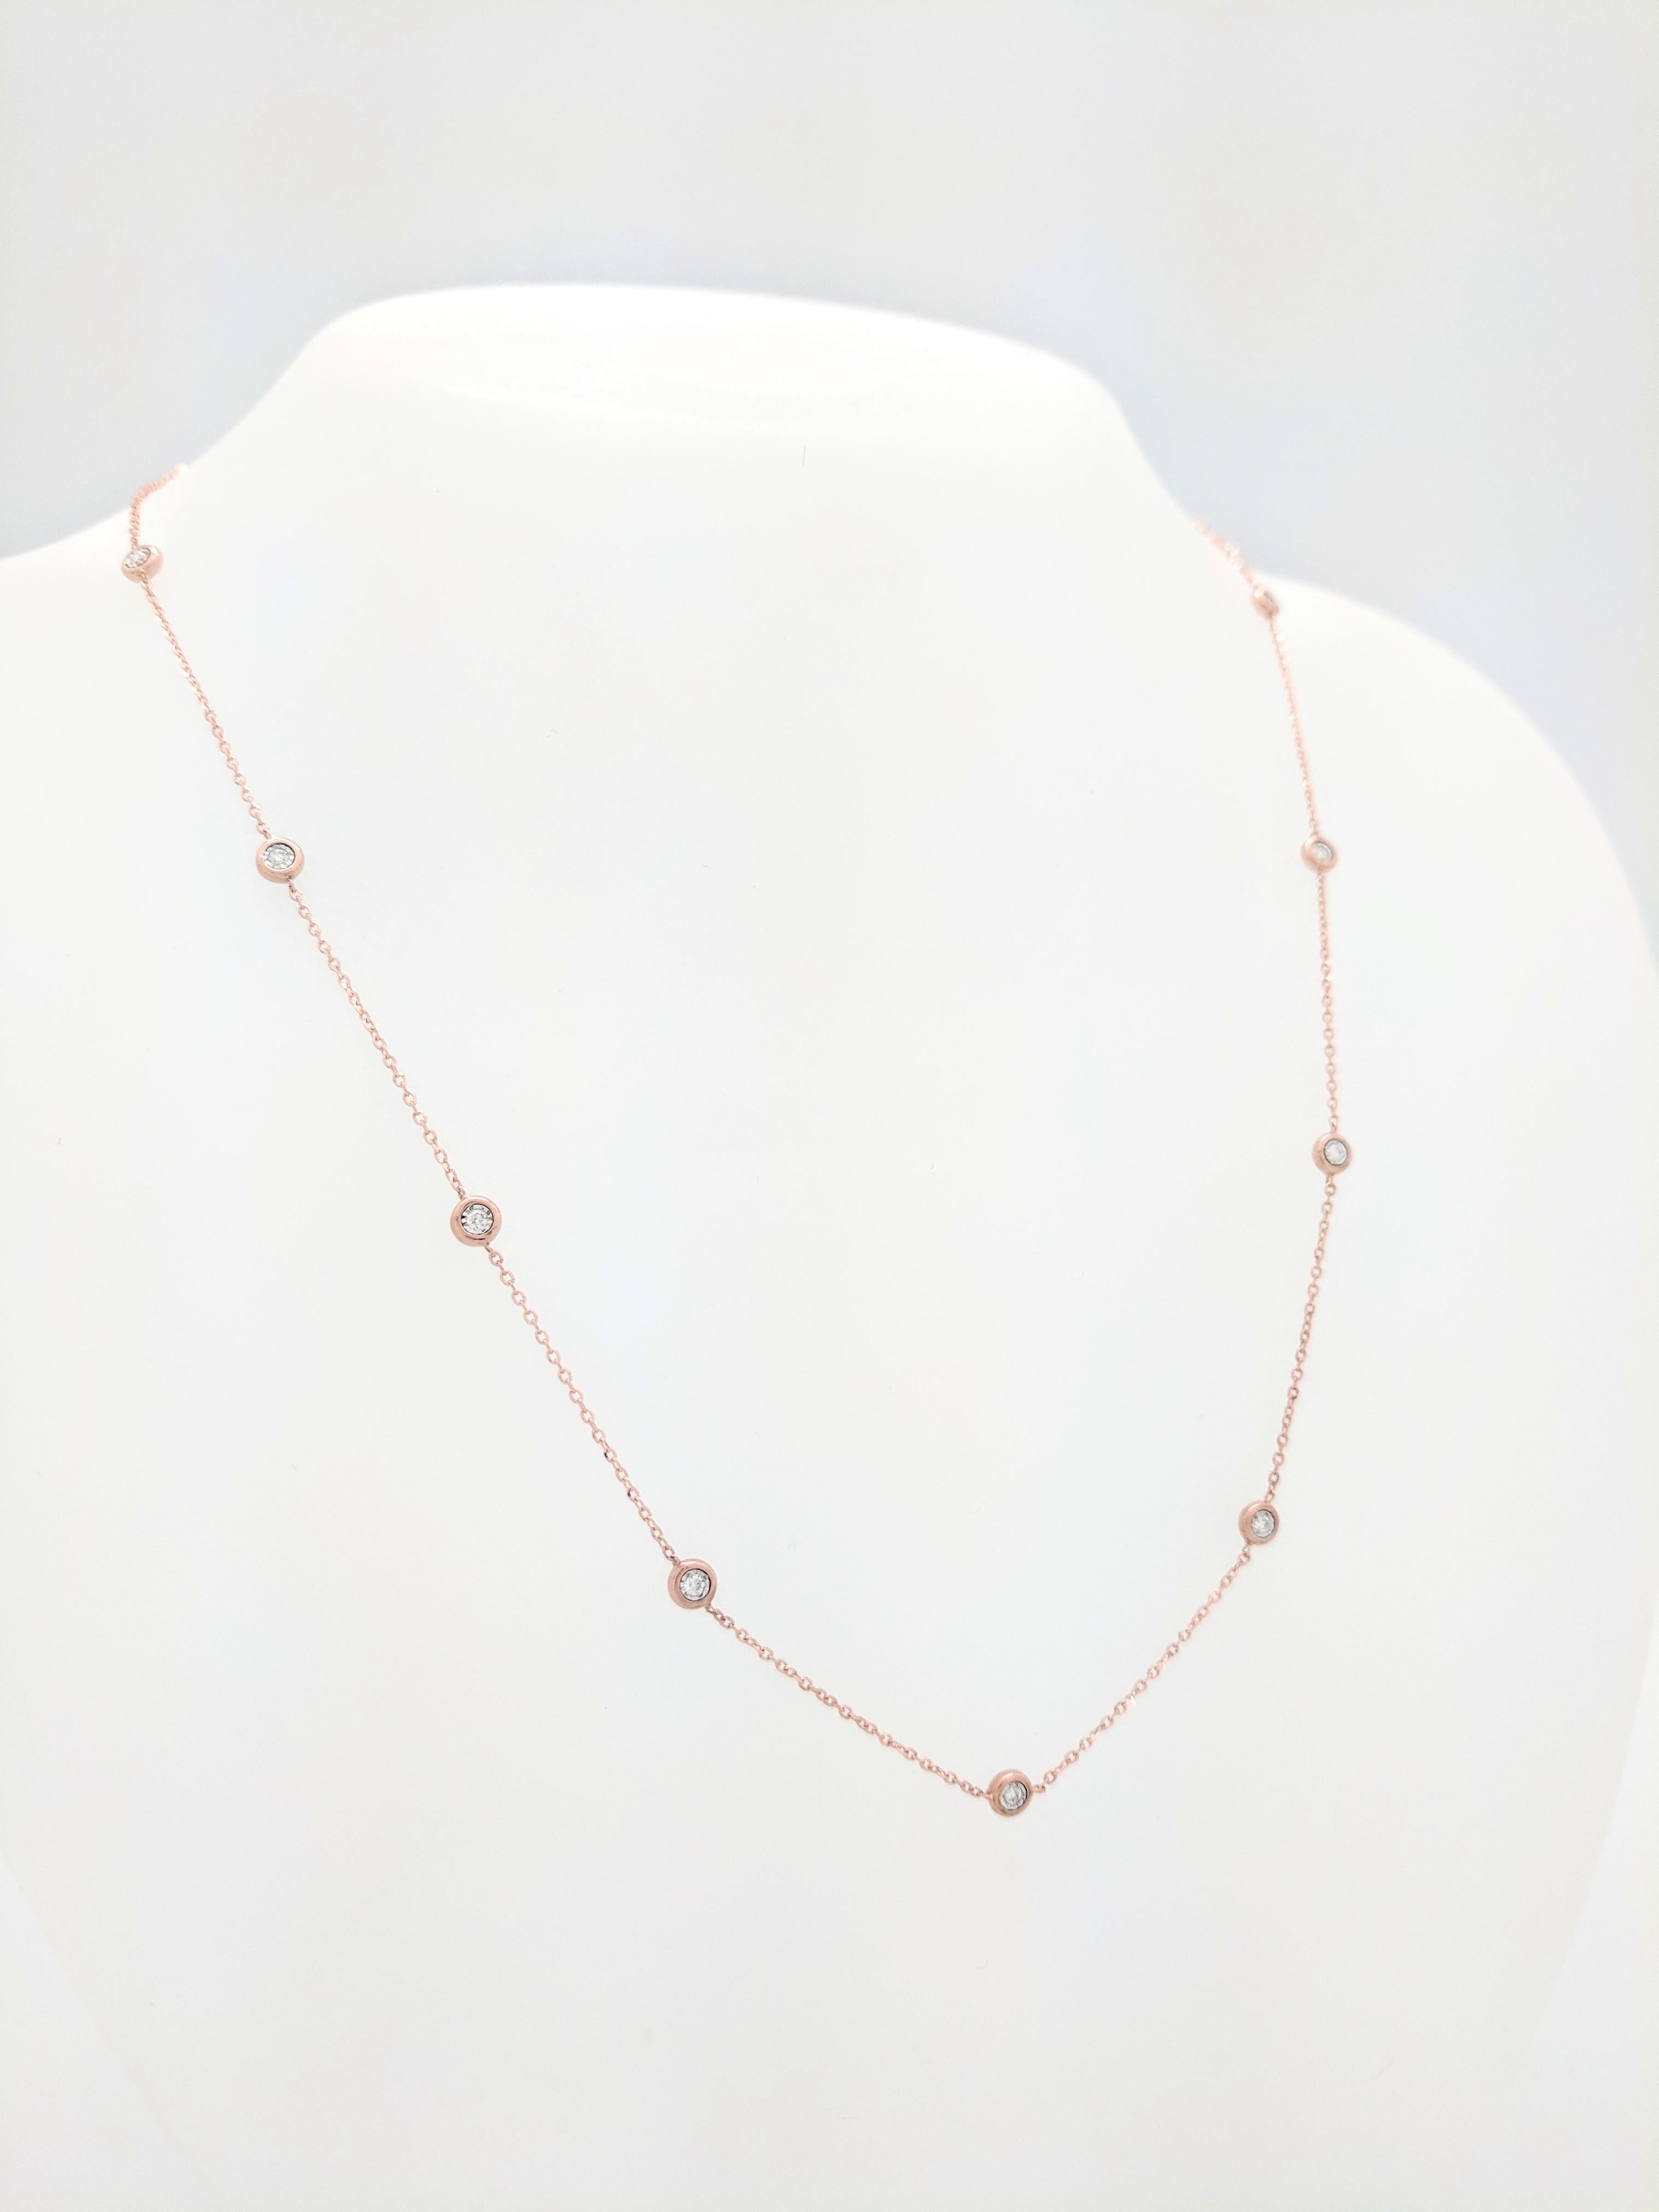 You are viewing a Stunning Diamond By The Yard Necklace. The necklace is crafted from 14k rose gold and weighs 2.6 grams. It features thirteen bezel set round brilliant diamond for an estimated .19tcw. The diamonds range from G-H in color and are